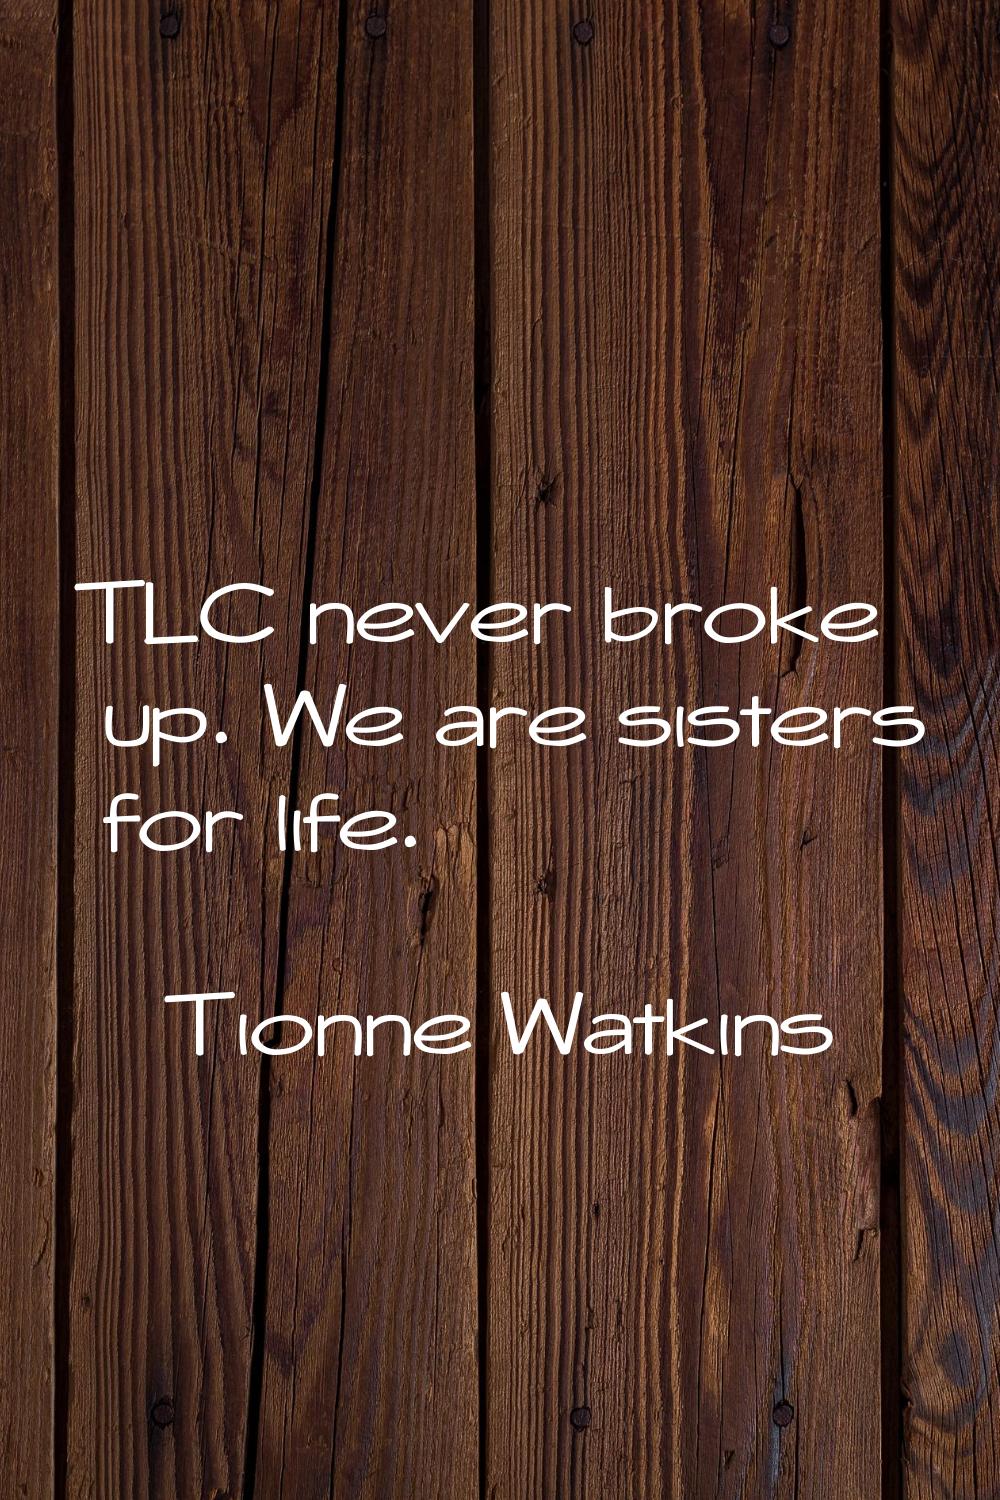 TLC never broke up. We are sisters for life.